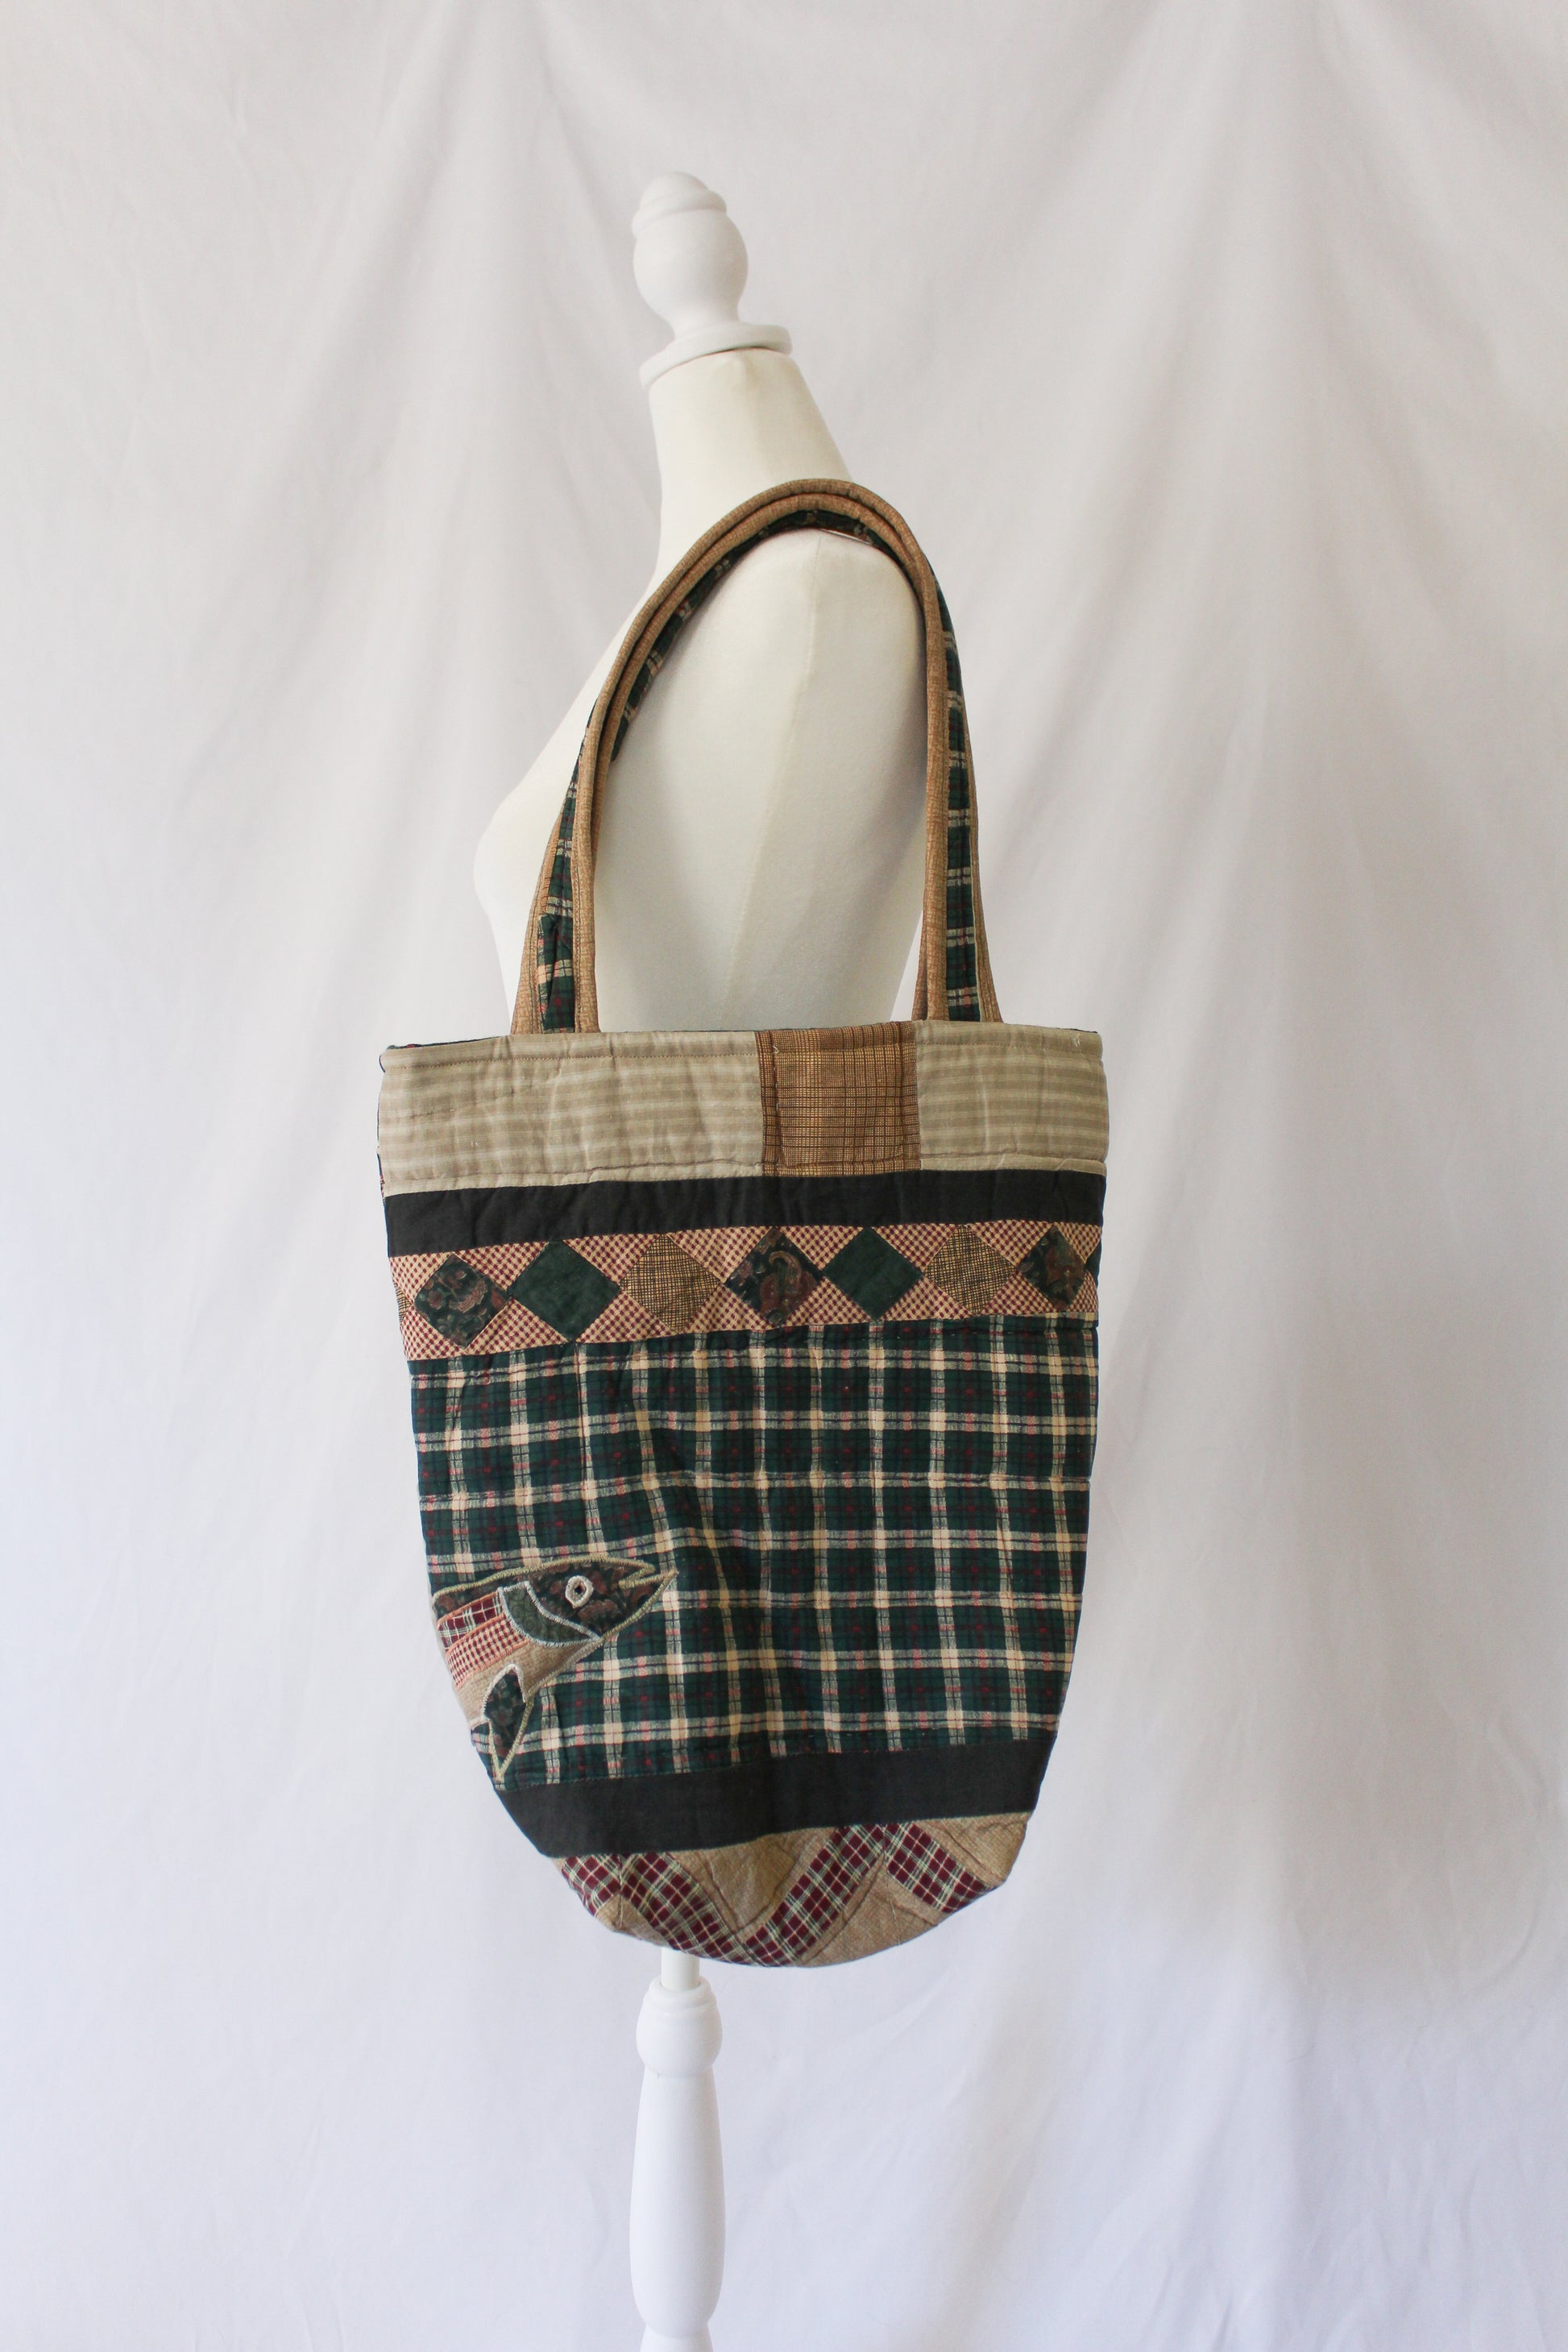 fish purse with green plaid, quilt tote purse with fish 